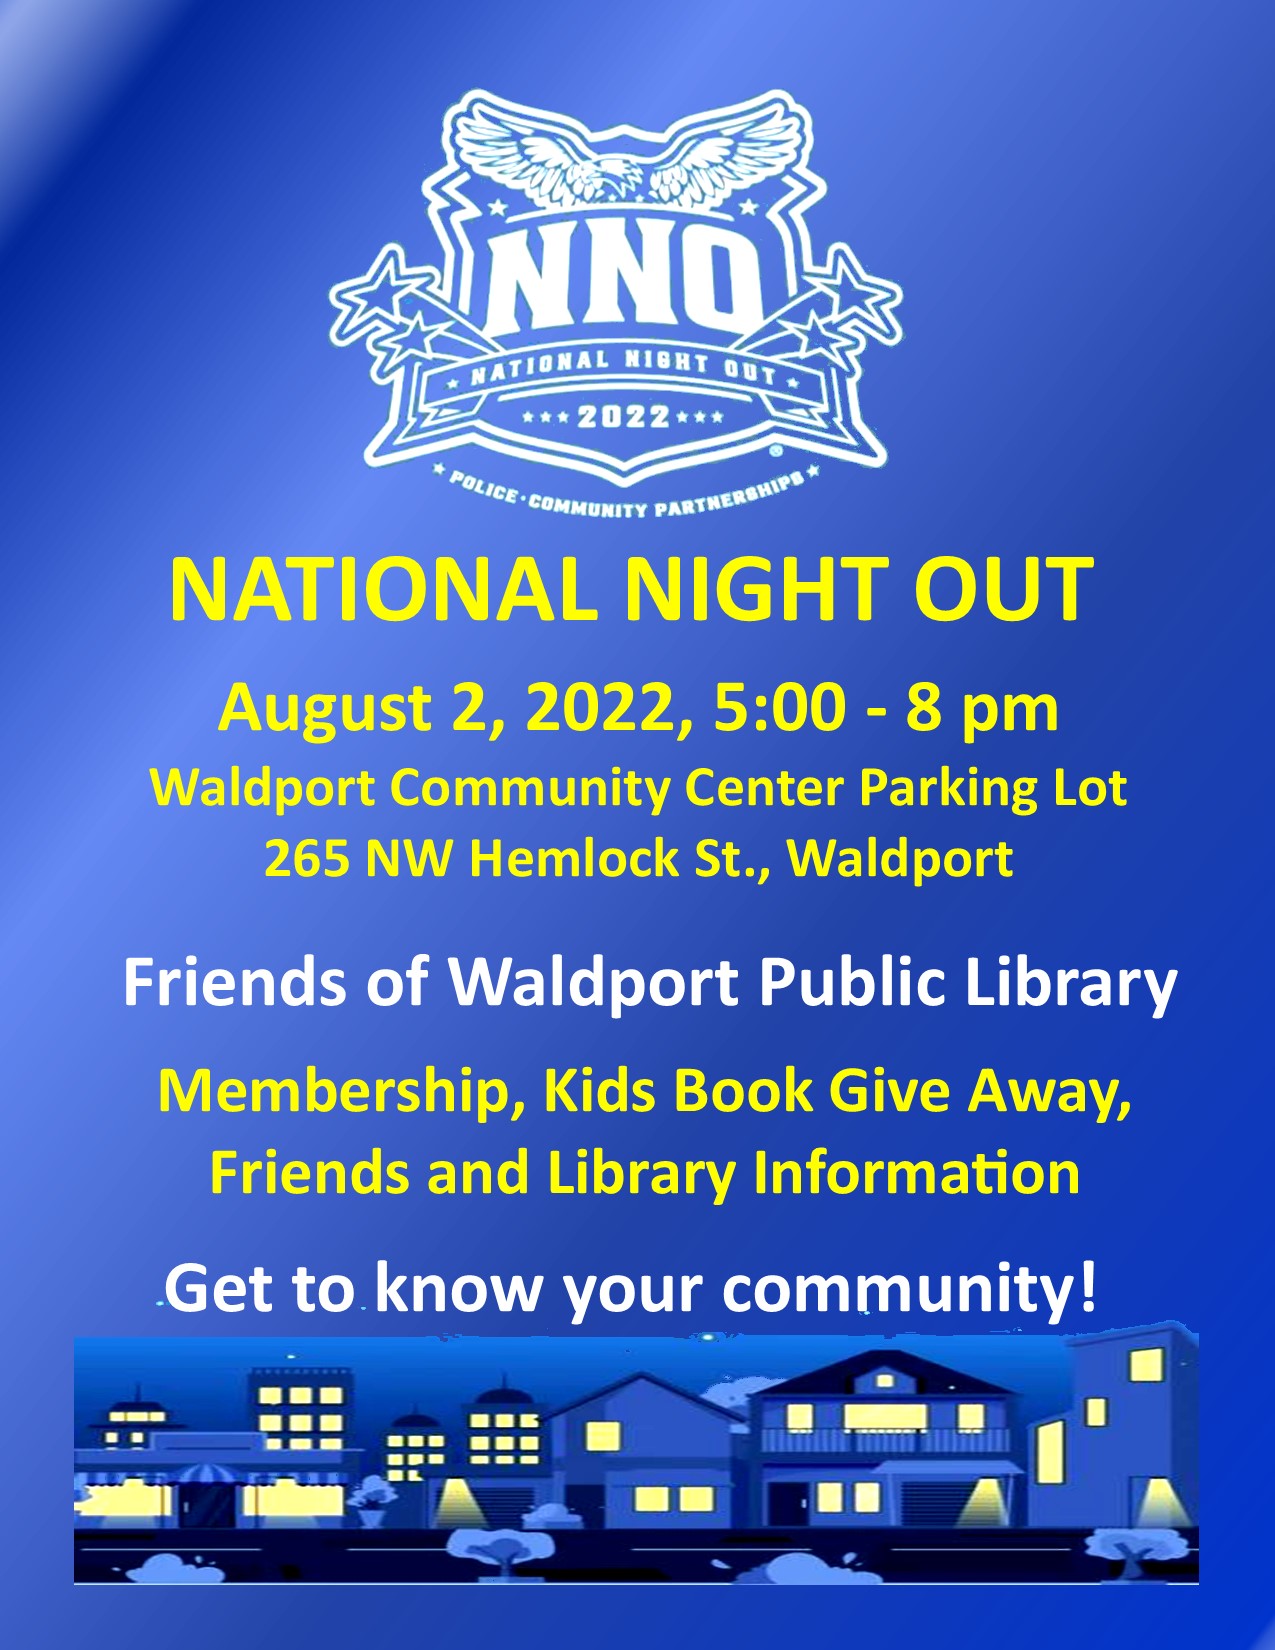 NEW Friends Safe Night Out Flyer 2022.jpg